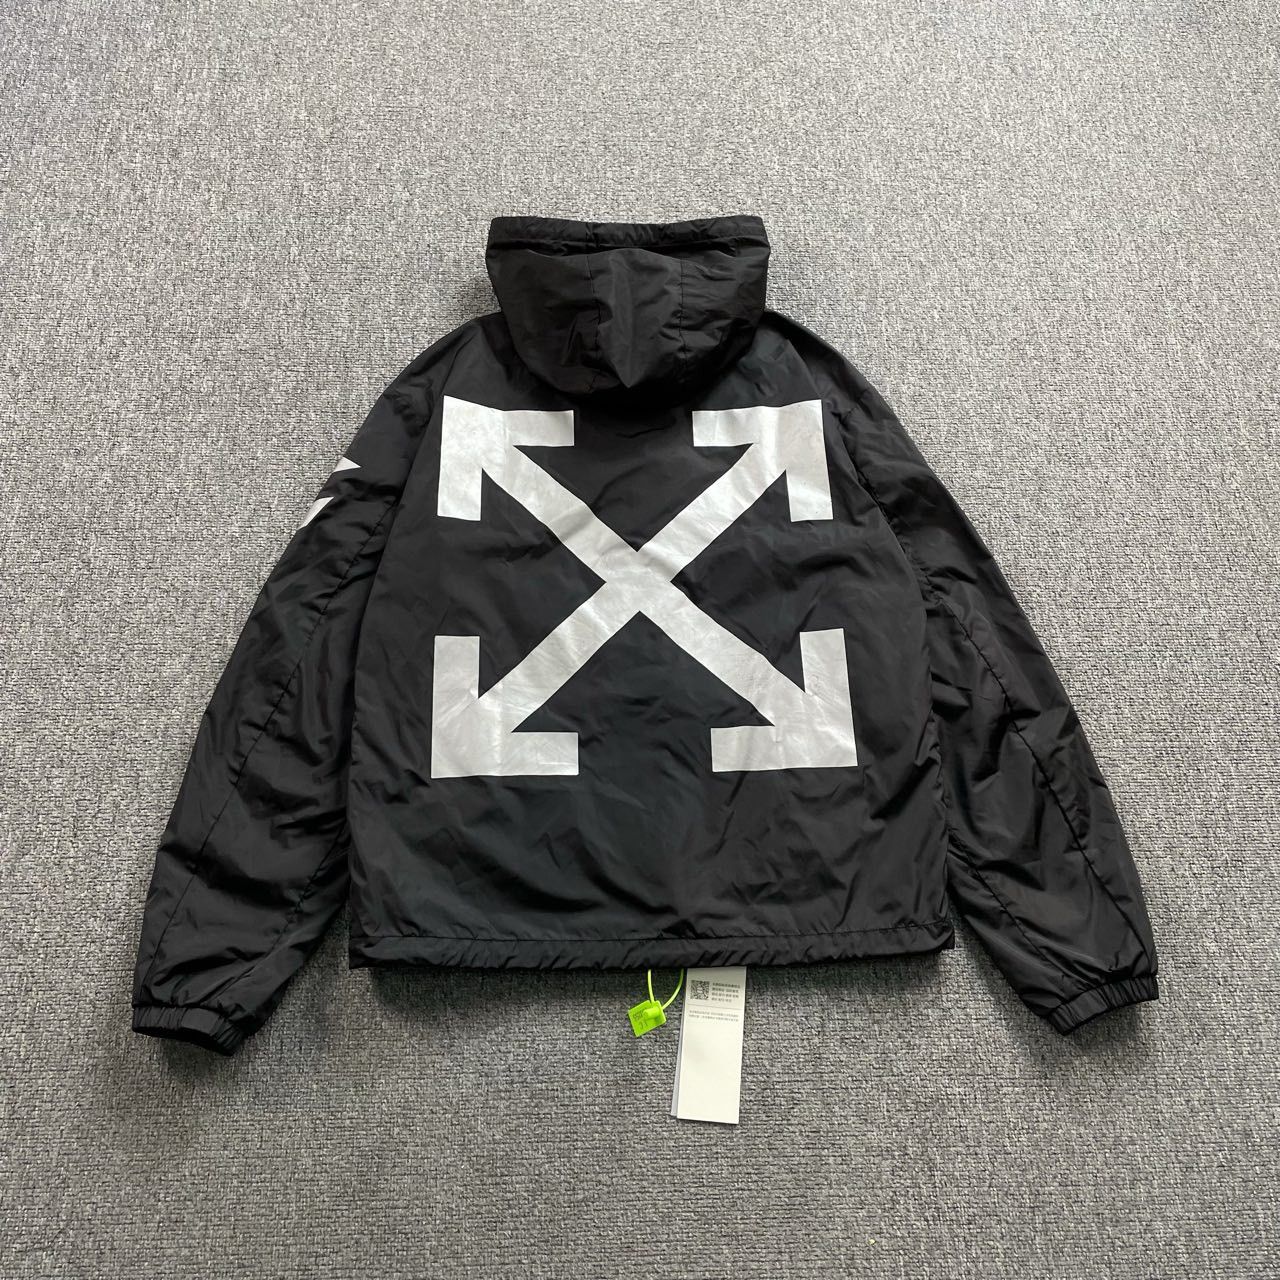 Moncler x Off-white 3M Reflective Zip-up Hoodie Light Jacket - 2